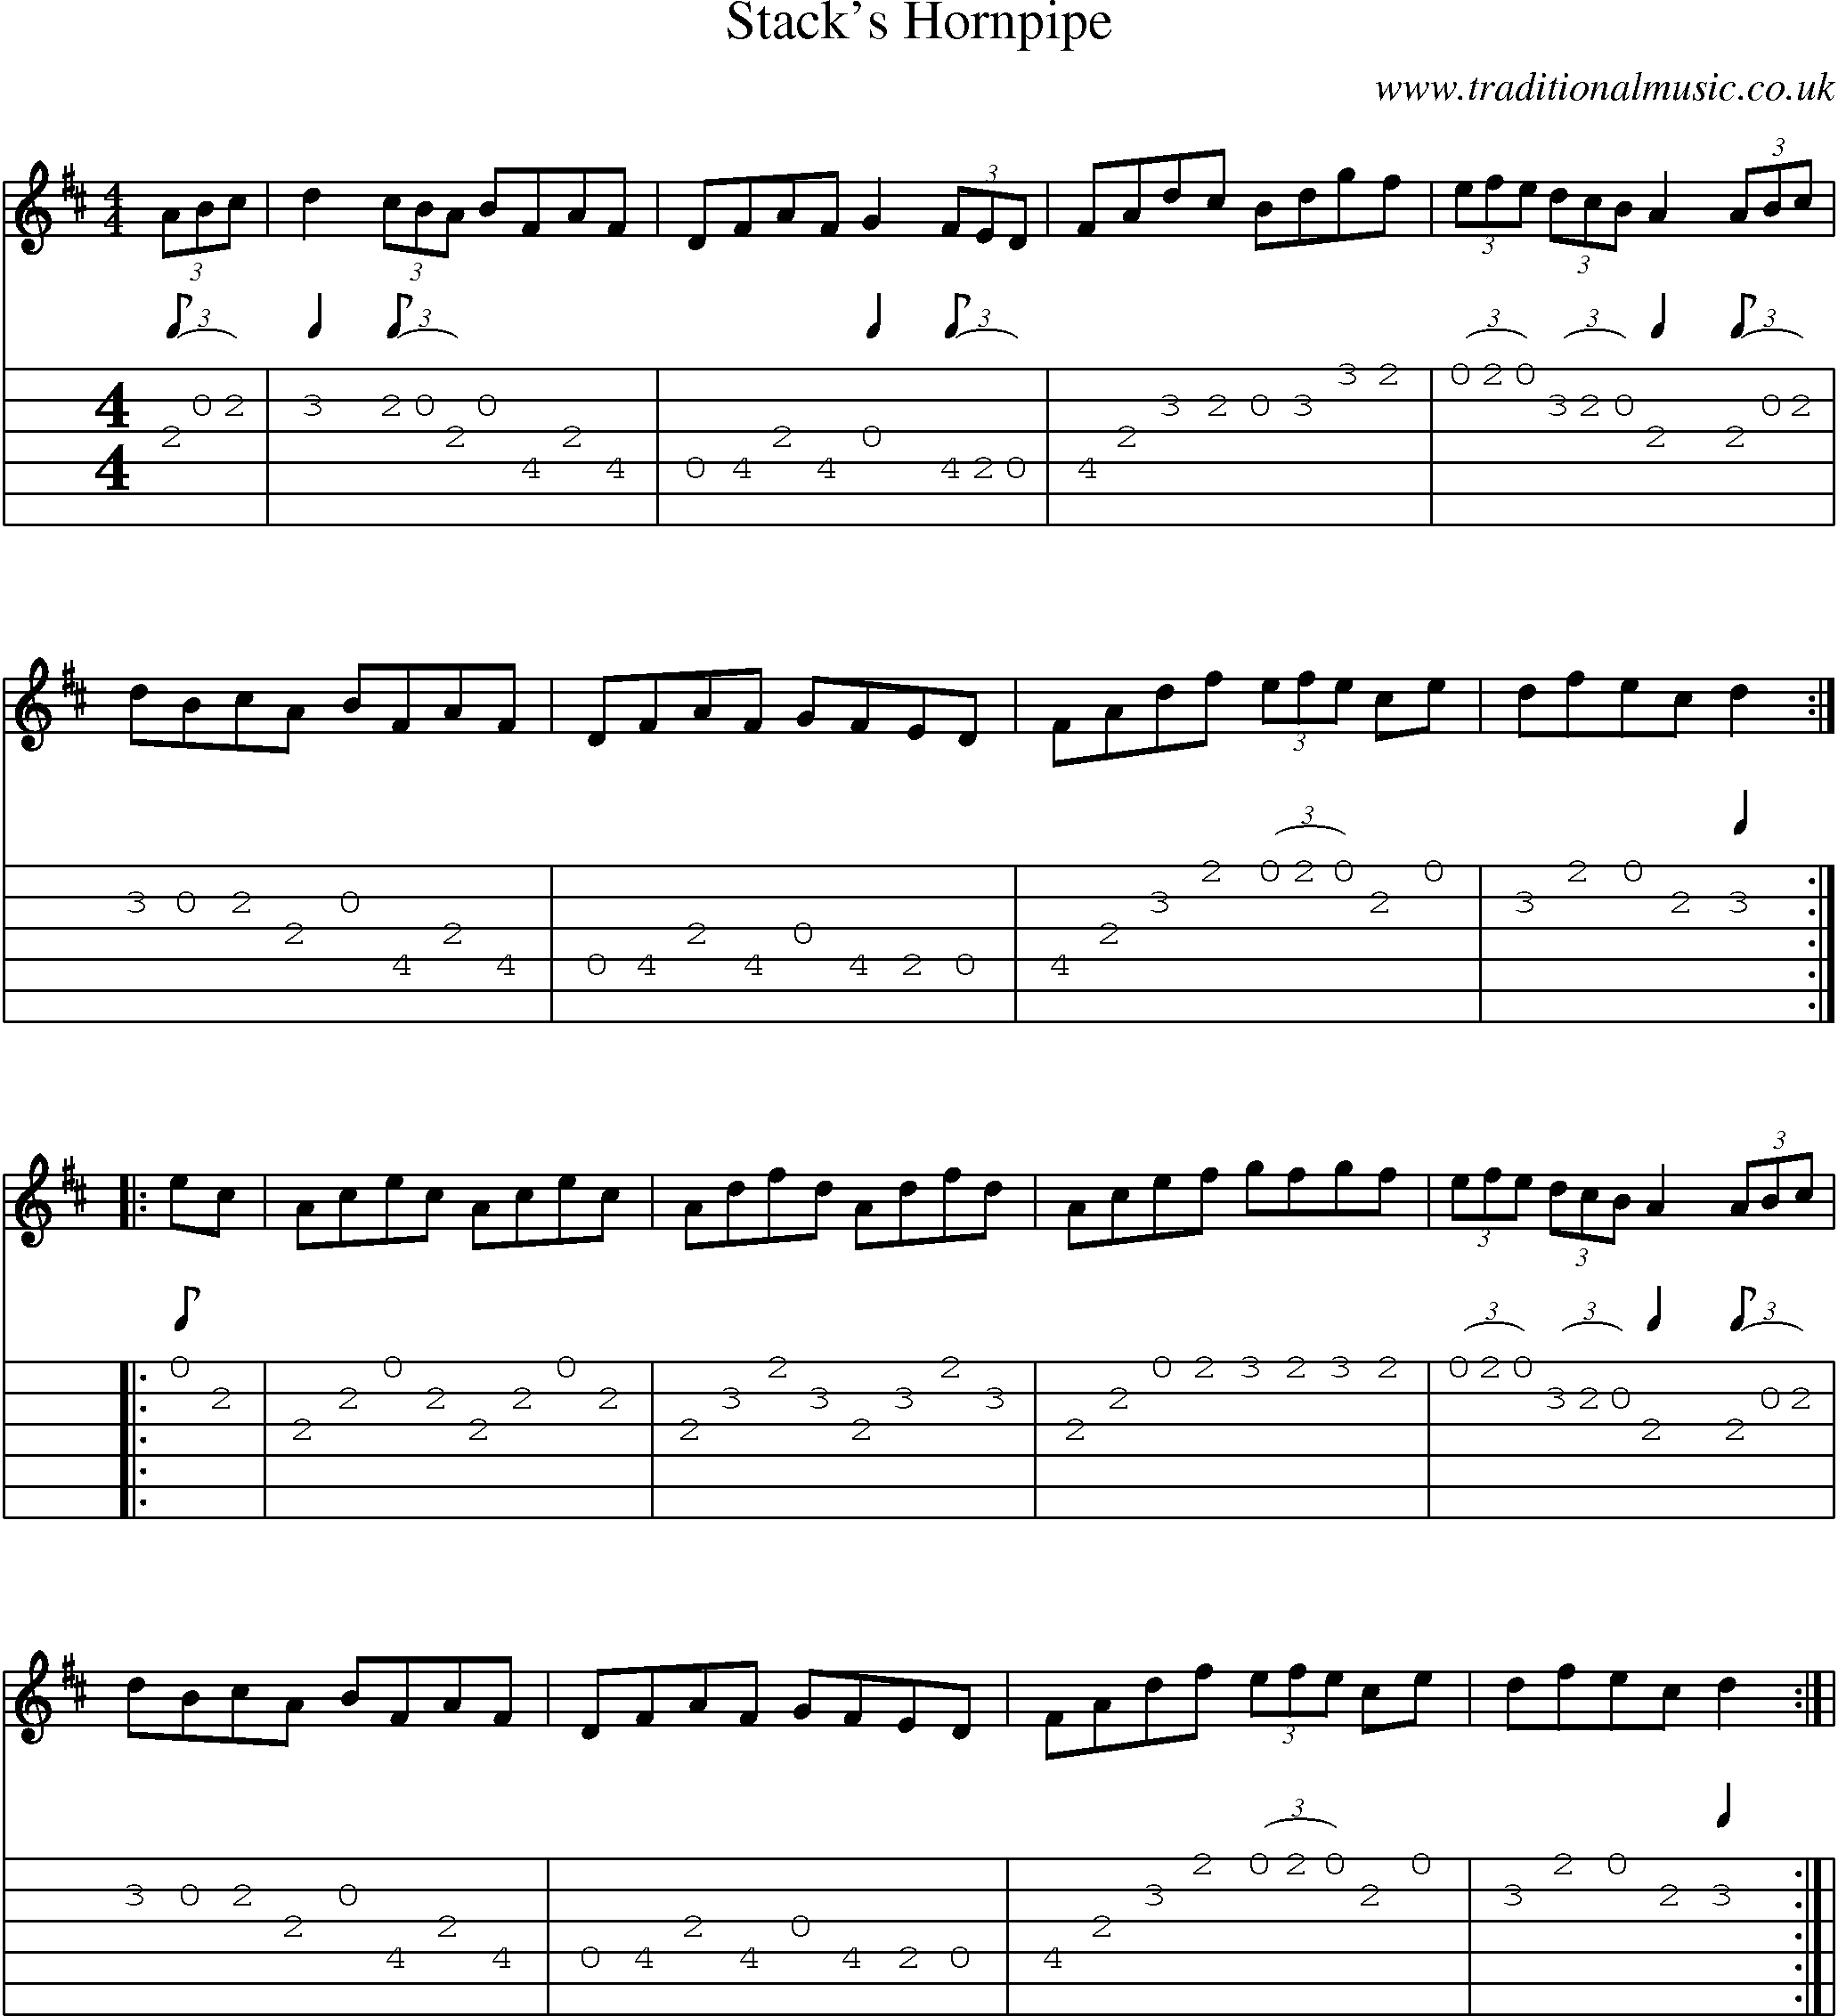 Music Score and Guitar Tabs for Stacks Hornpipe